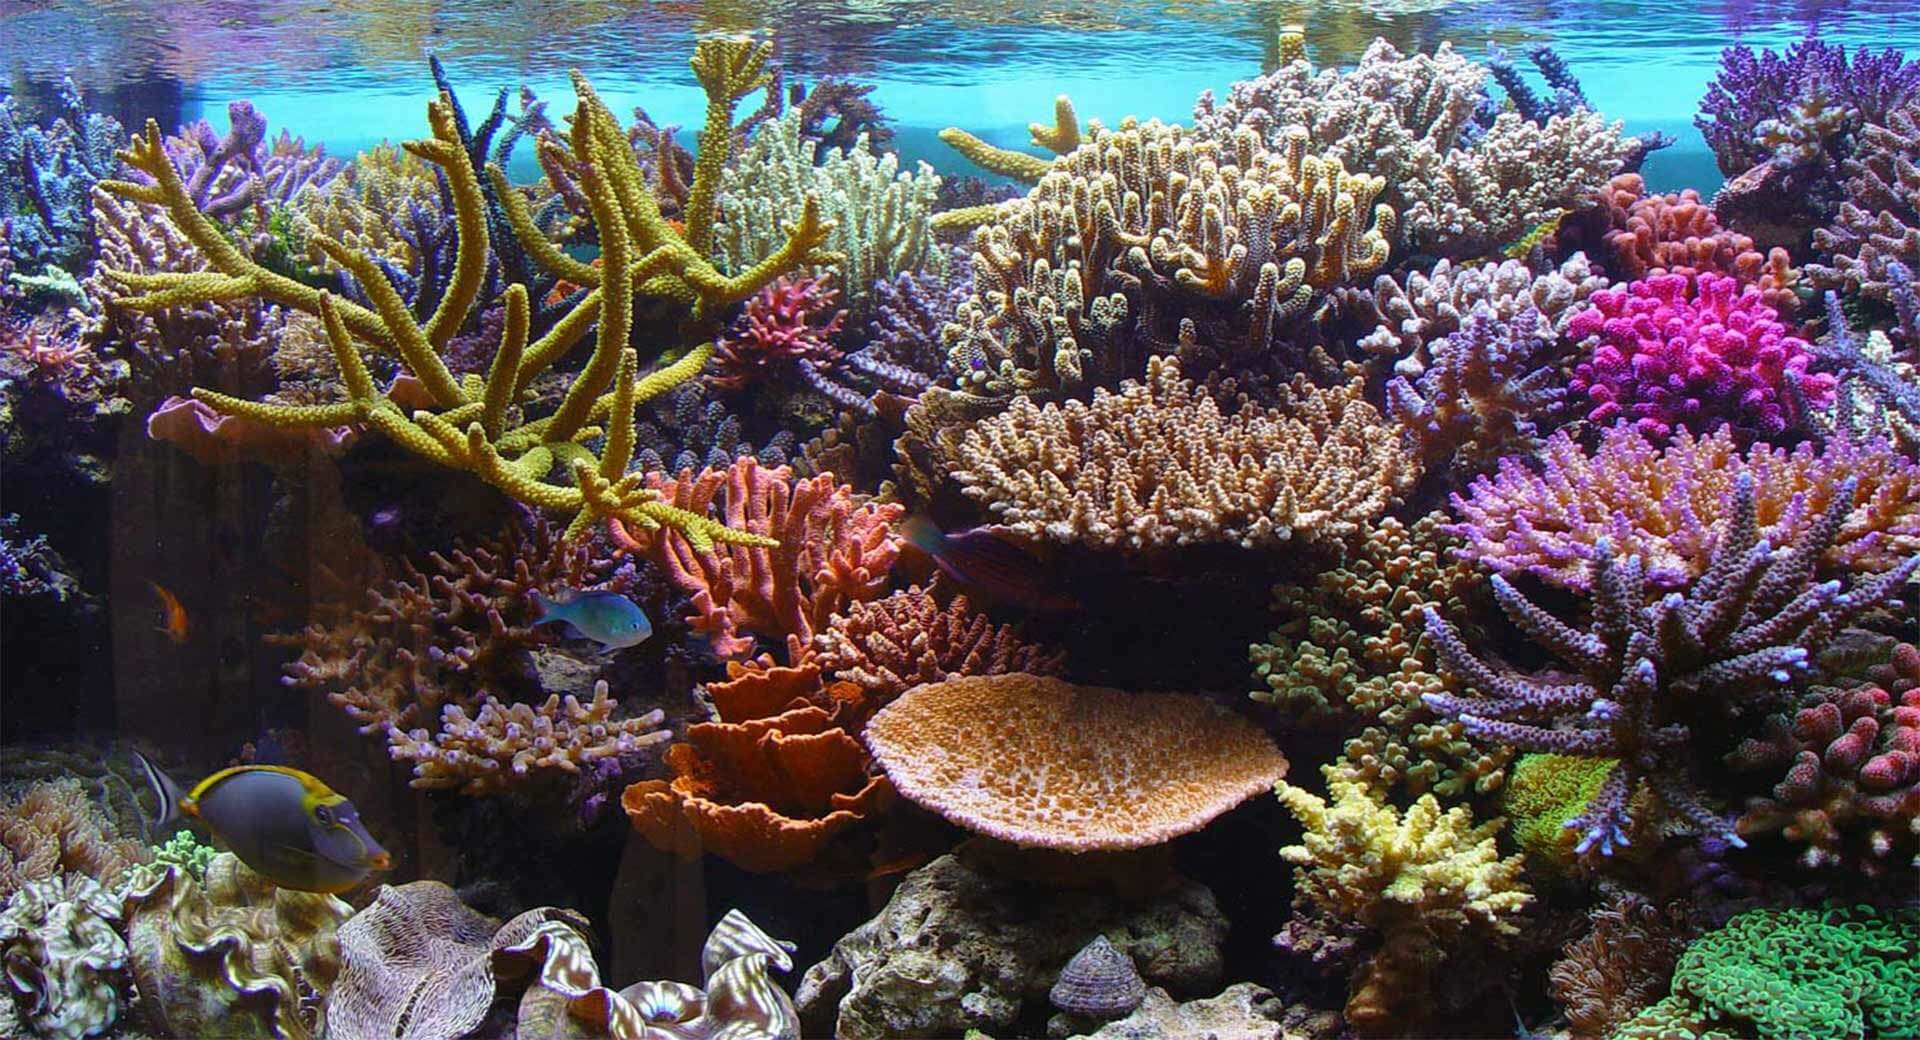 How to treat Coral Cuts and Scrapes